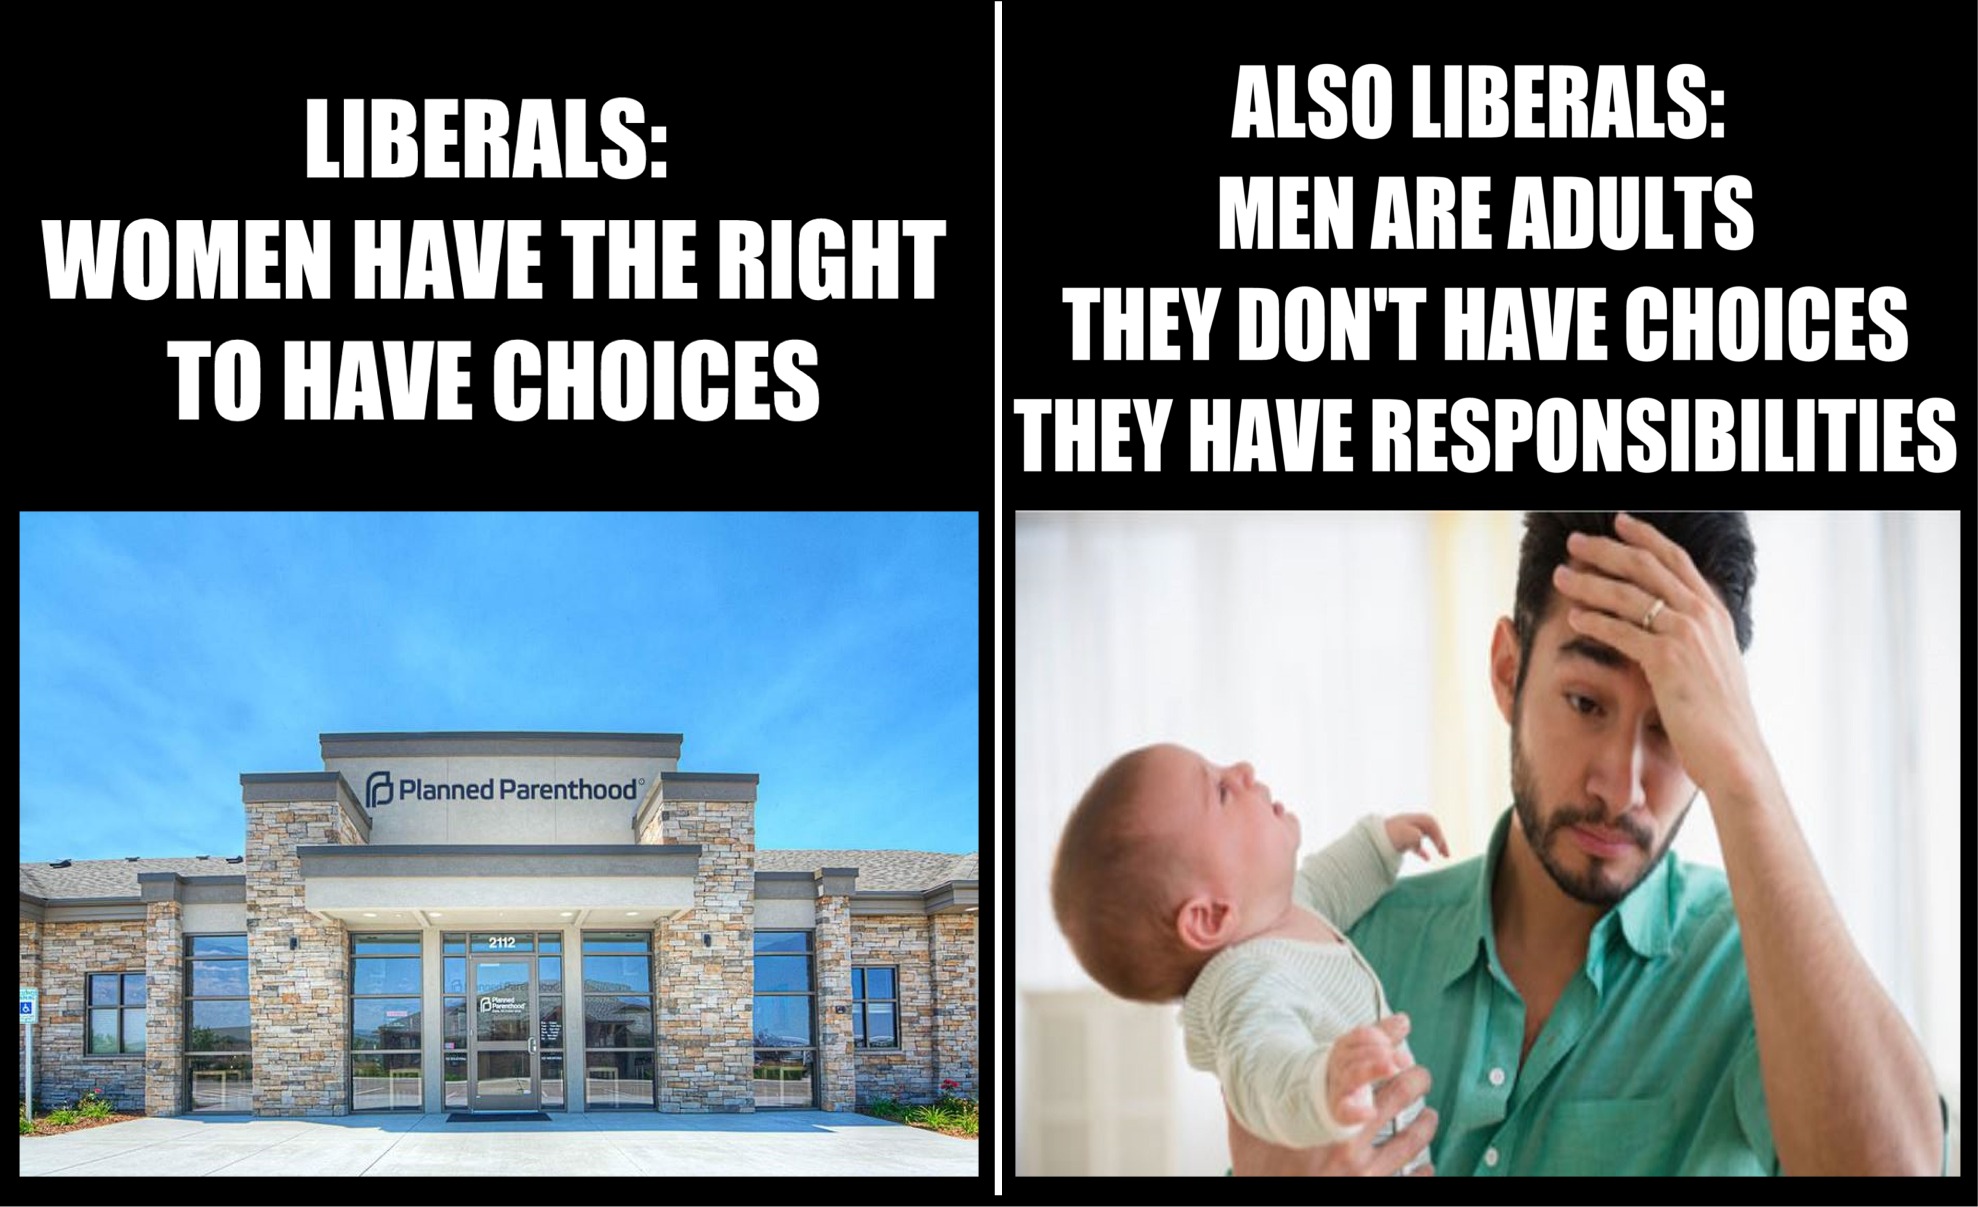 memes - presentation - Liberals Women Have The Right To Have Choices Also Liberals Men Are Adults They Don'T Have Choices They Have Responsibilities Planned Parenthood 2112 All